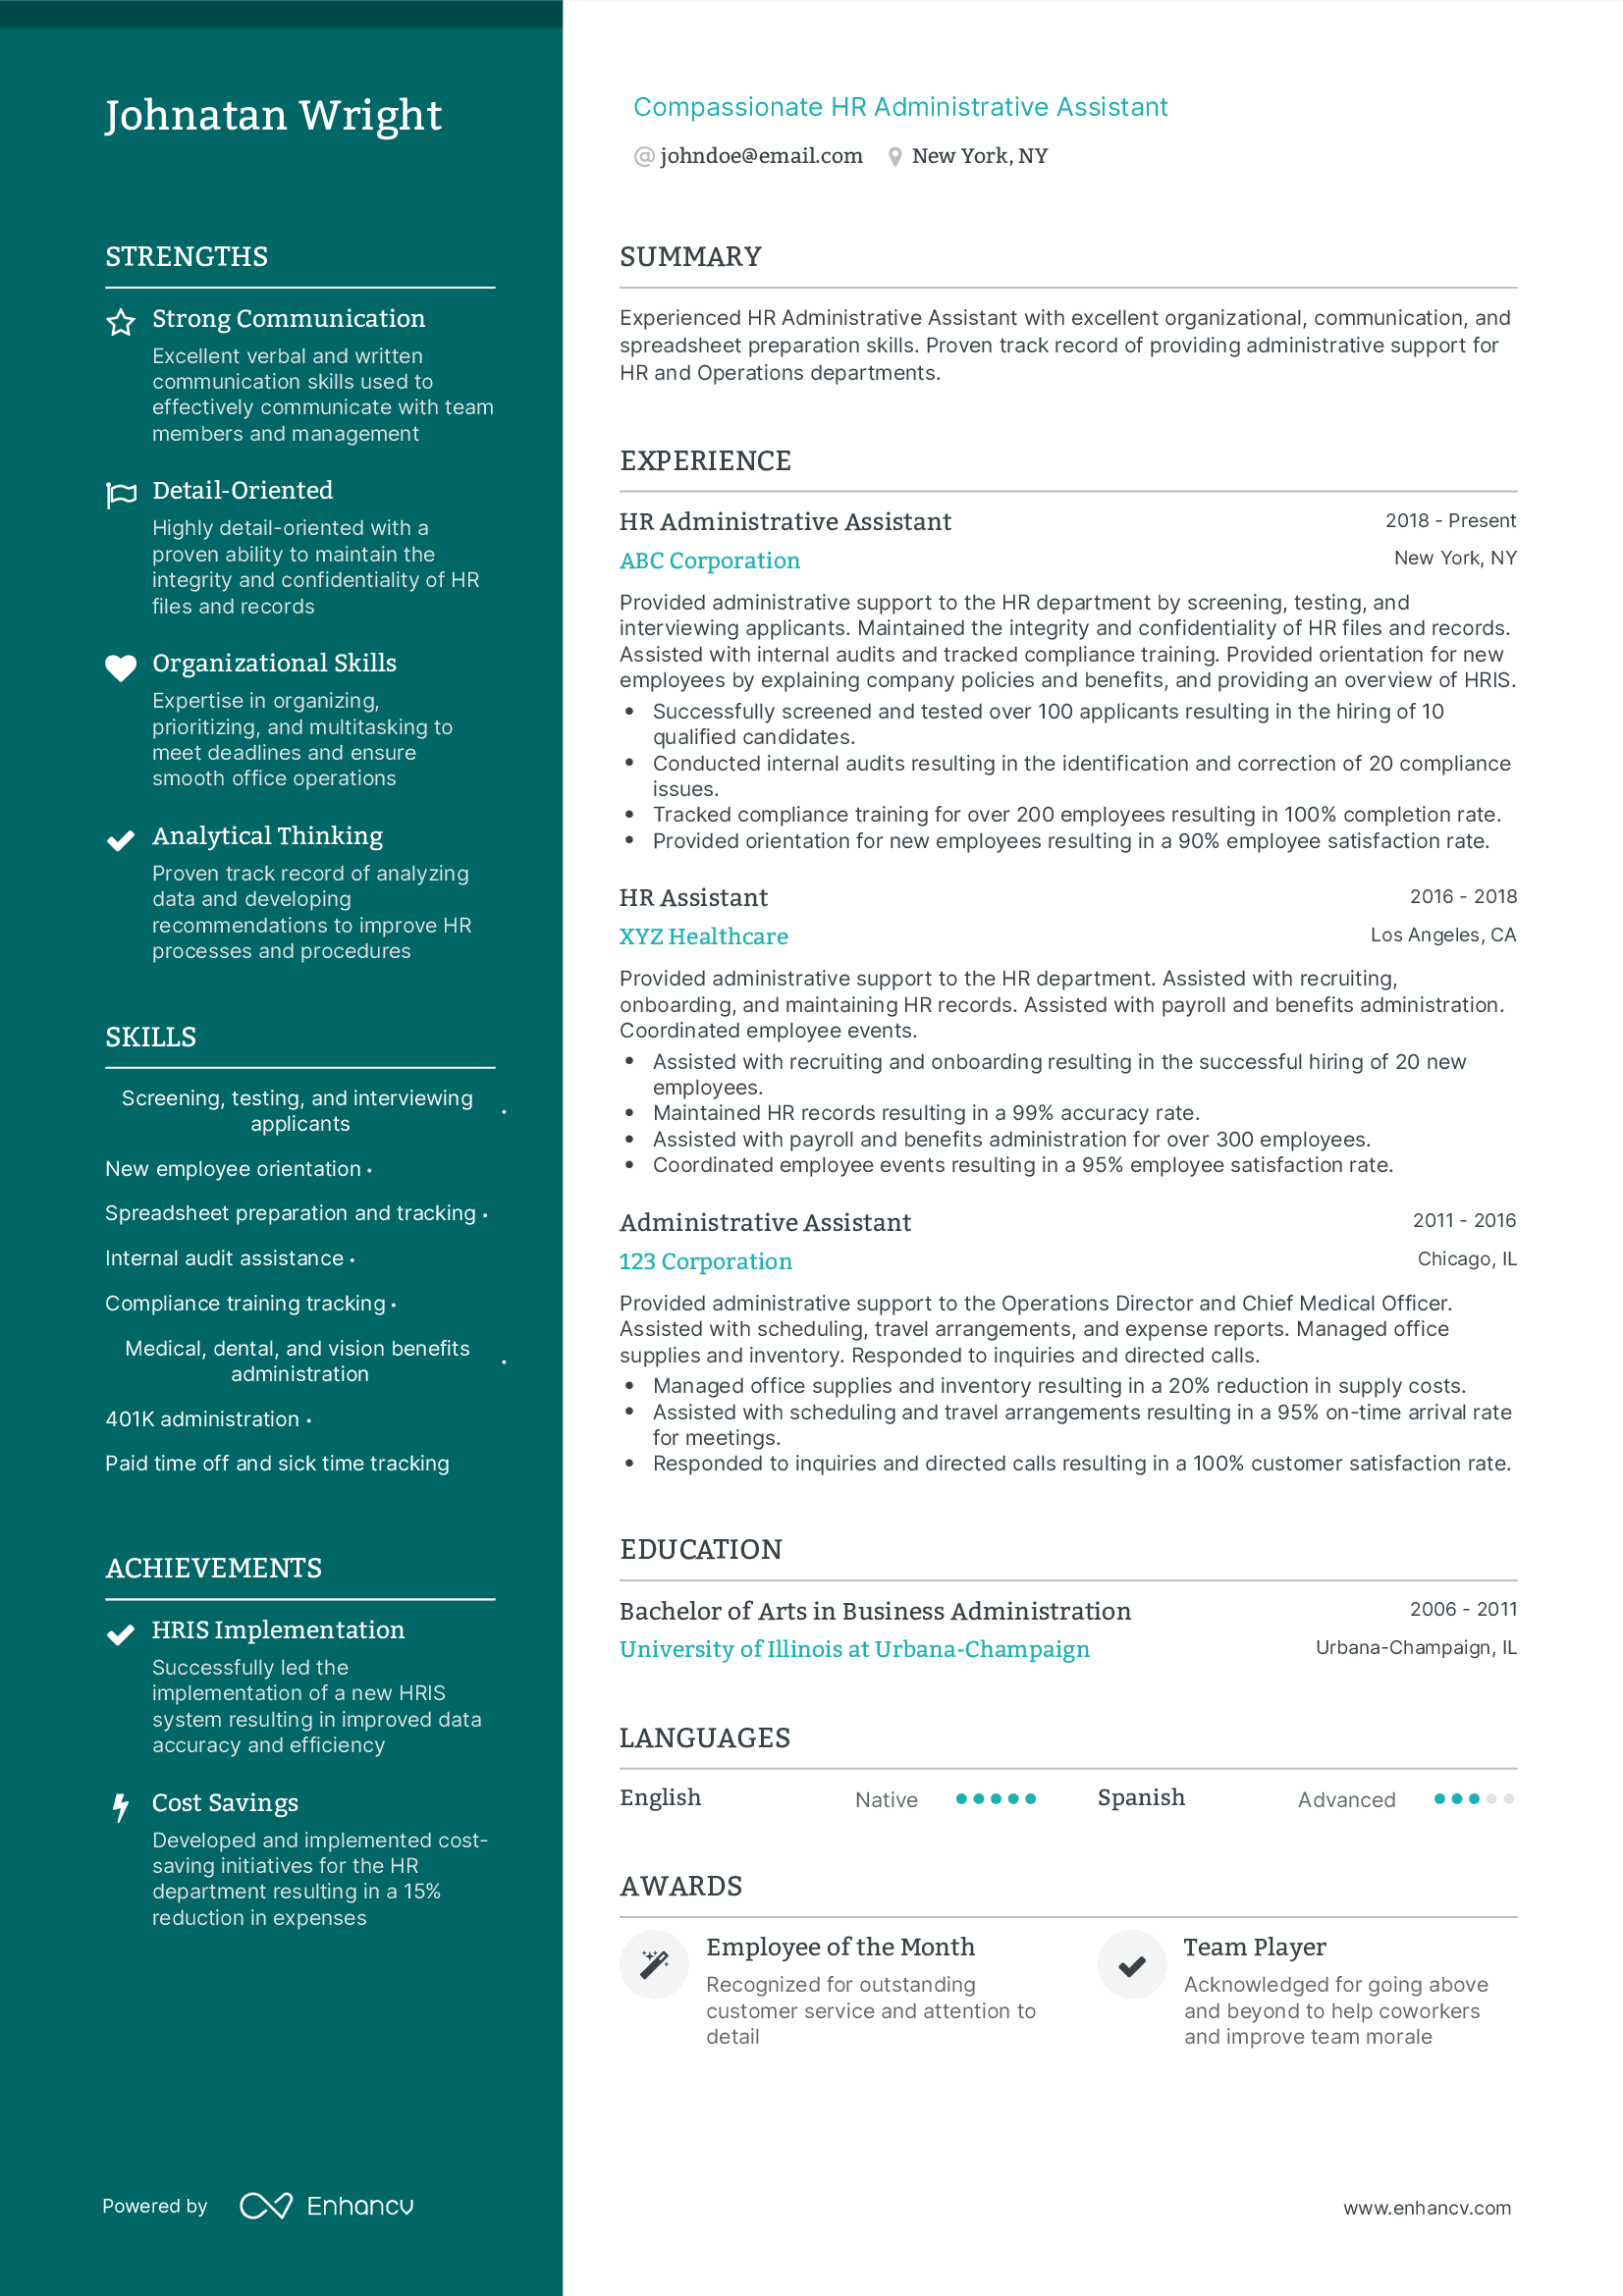 Compassionate HR Administrative Assistant resume example